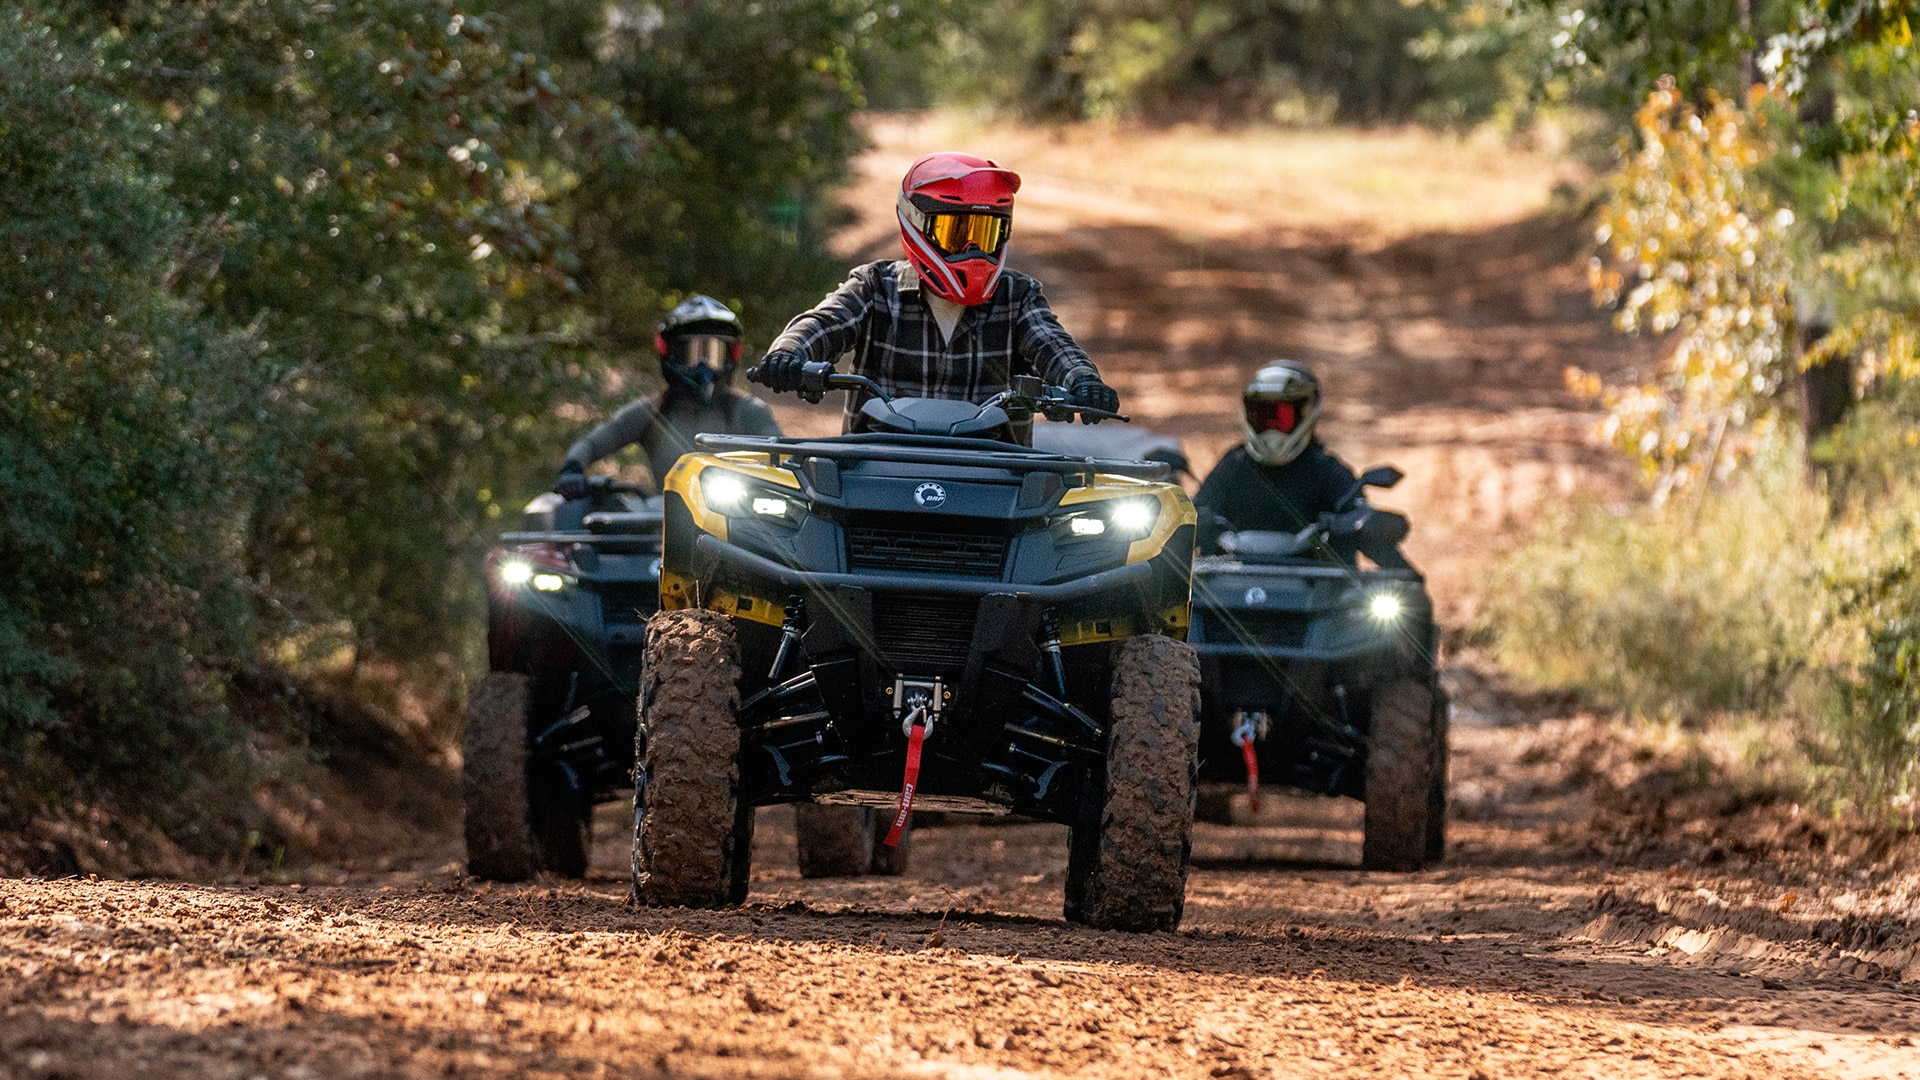 Can-Am riders driving ATVs on a trail